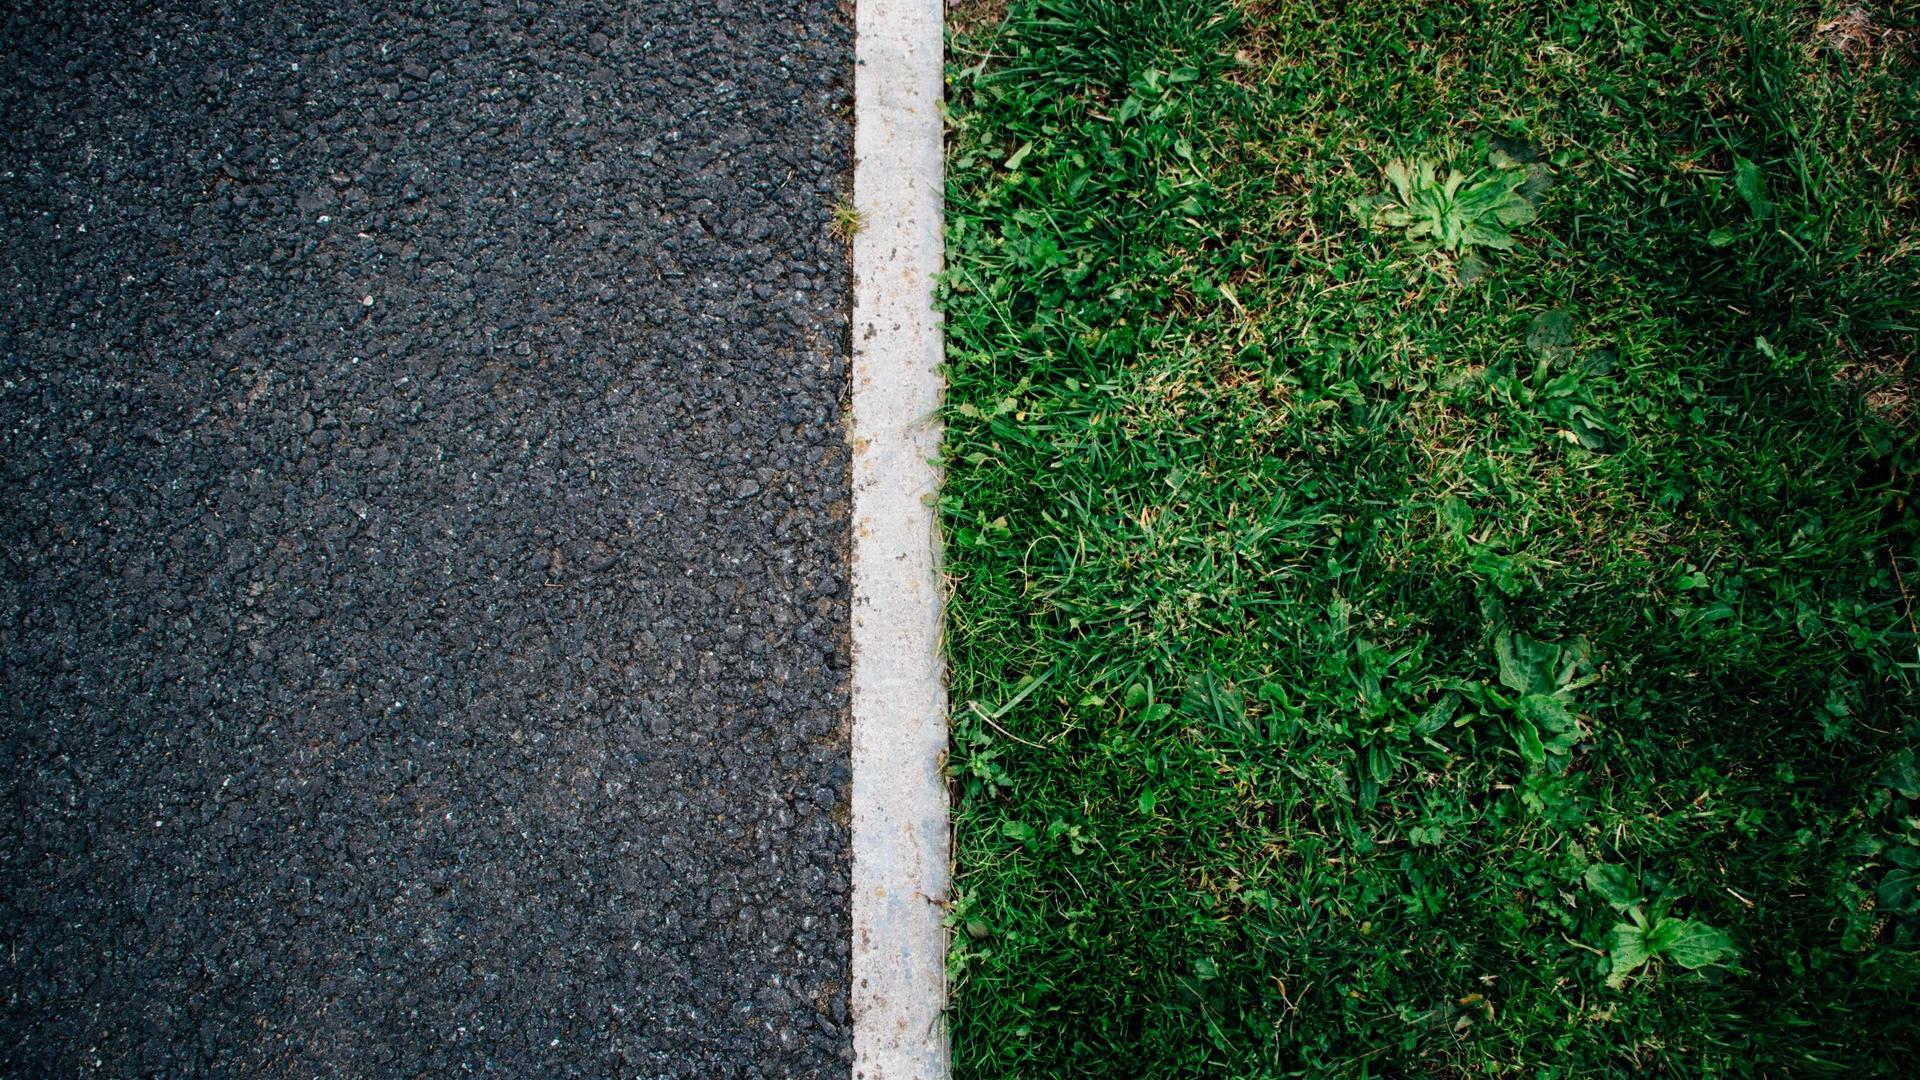 The left side of the picture is a street and the right side grass. Both sides are divided by a white line